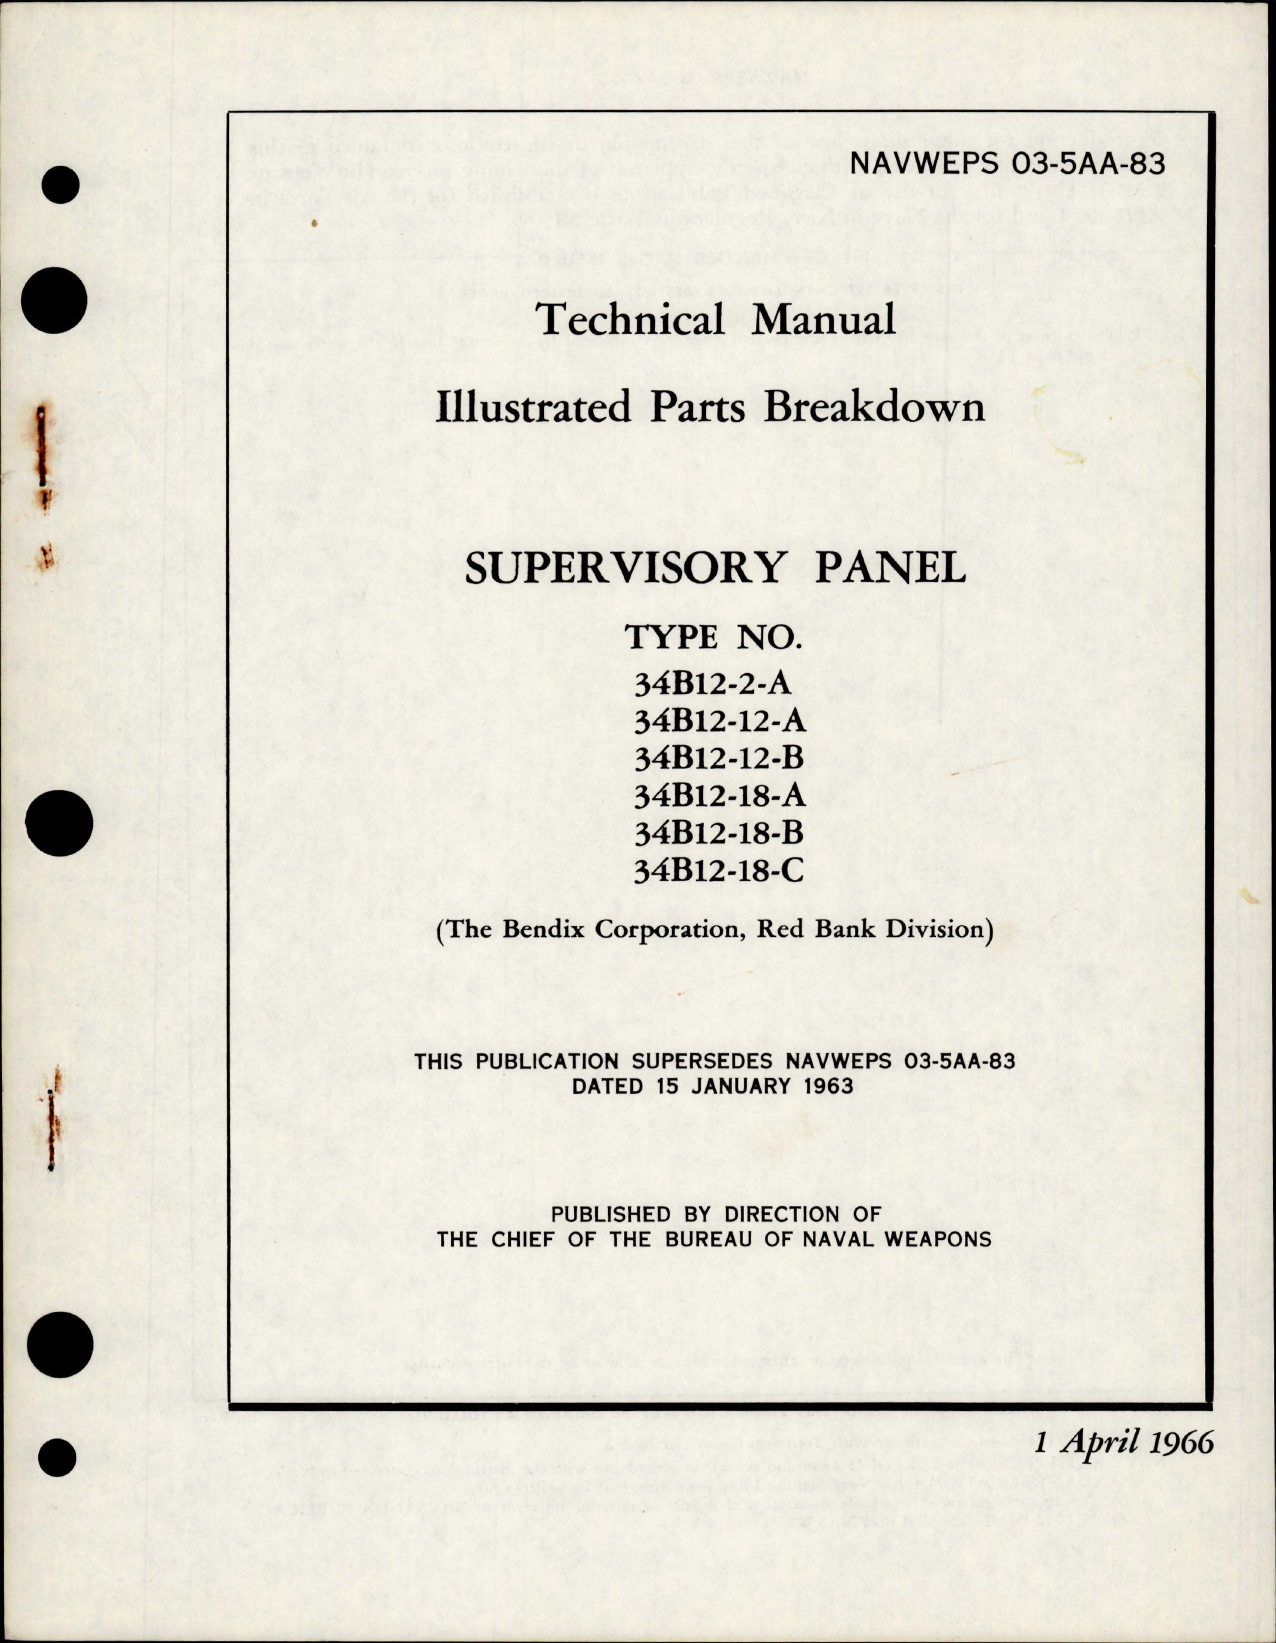 Sample page 1 from AirCorps Library document: Illustrated Parts Breakdown for Supervisory Panel